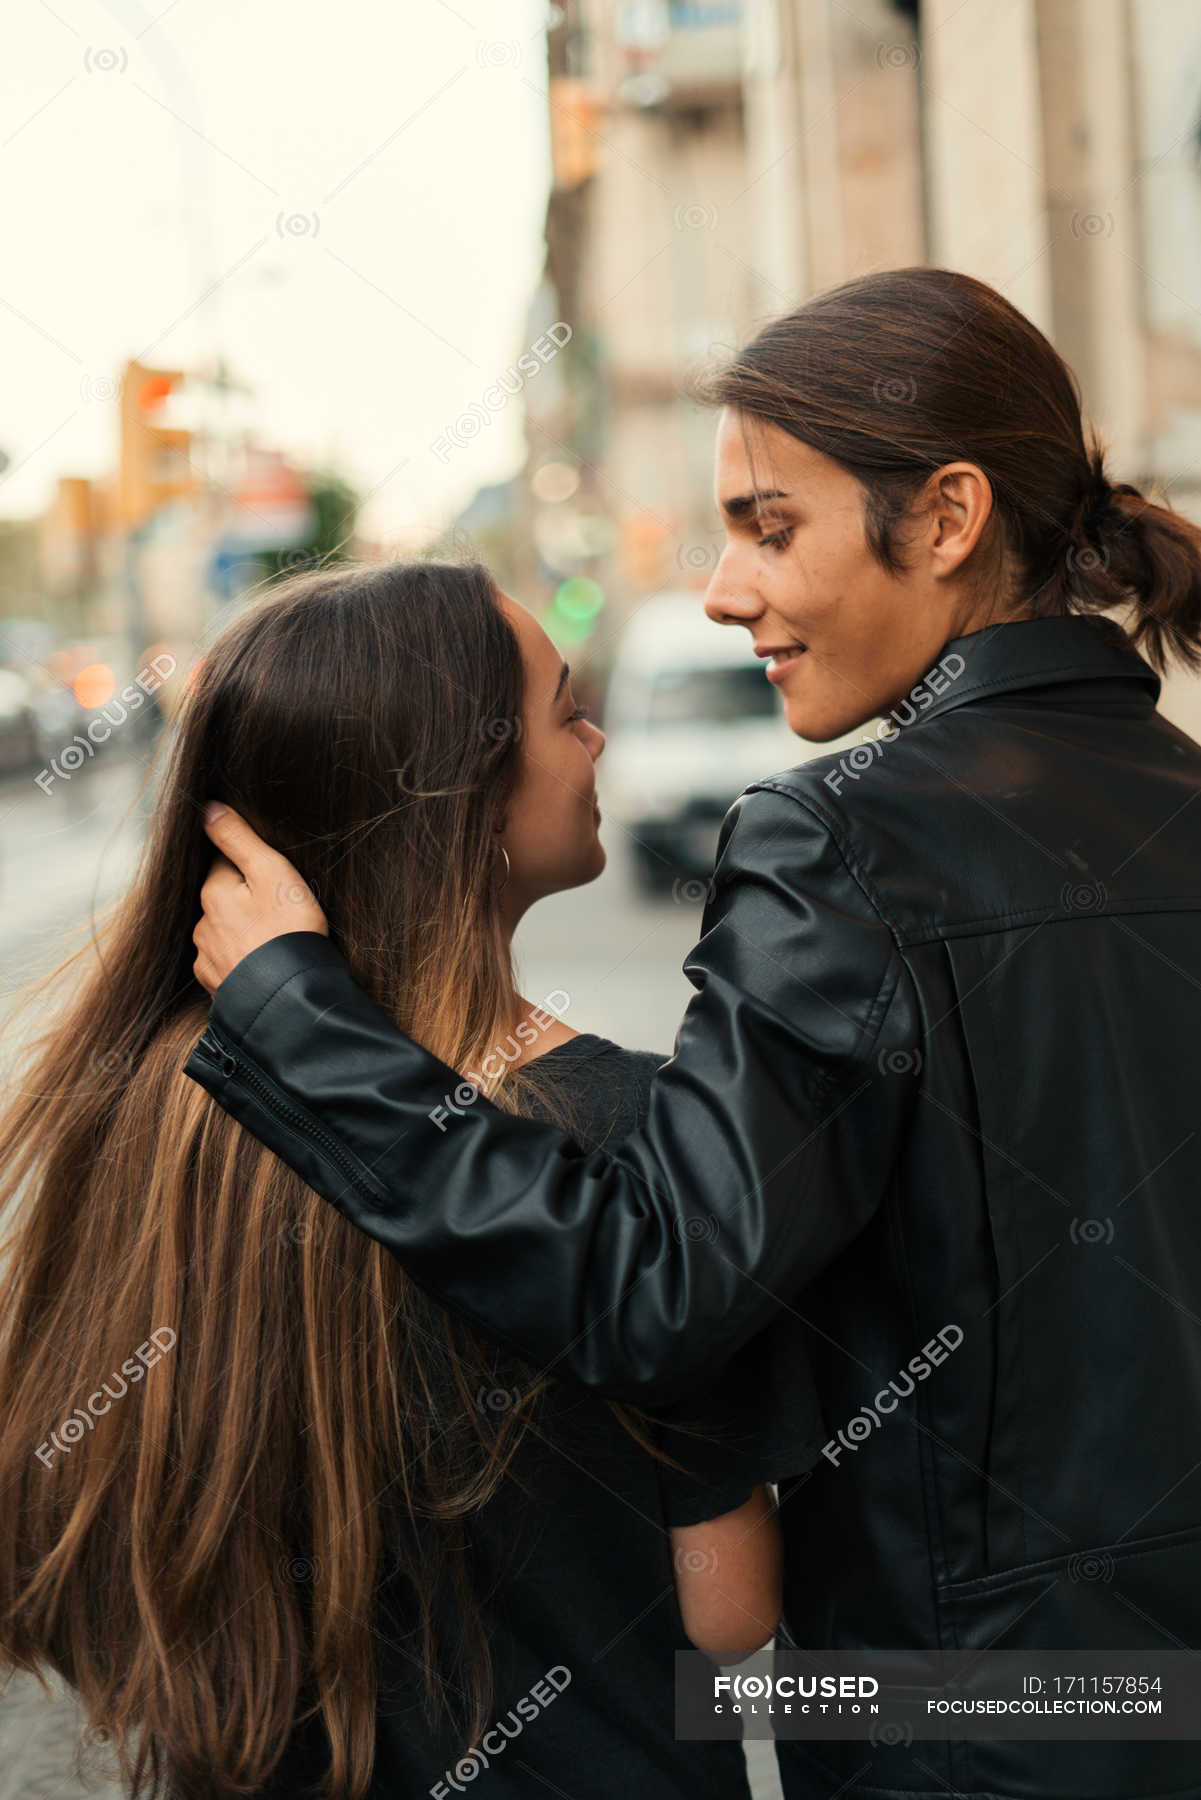 Back view of couple walking on street together and looking each one. —  vertical, long hair - Stock Photo | #171157854